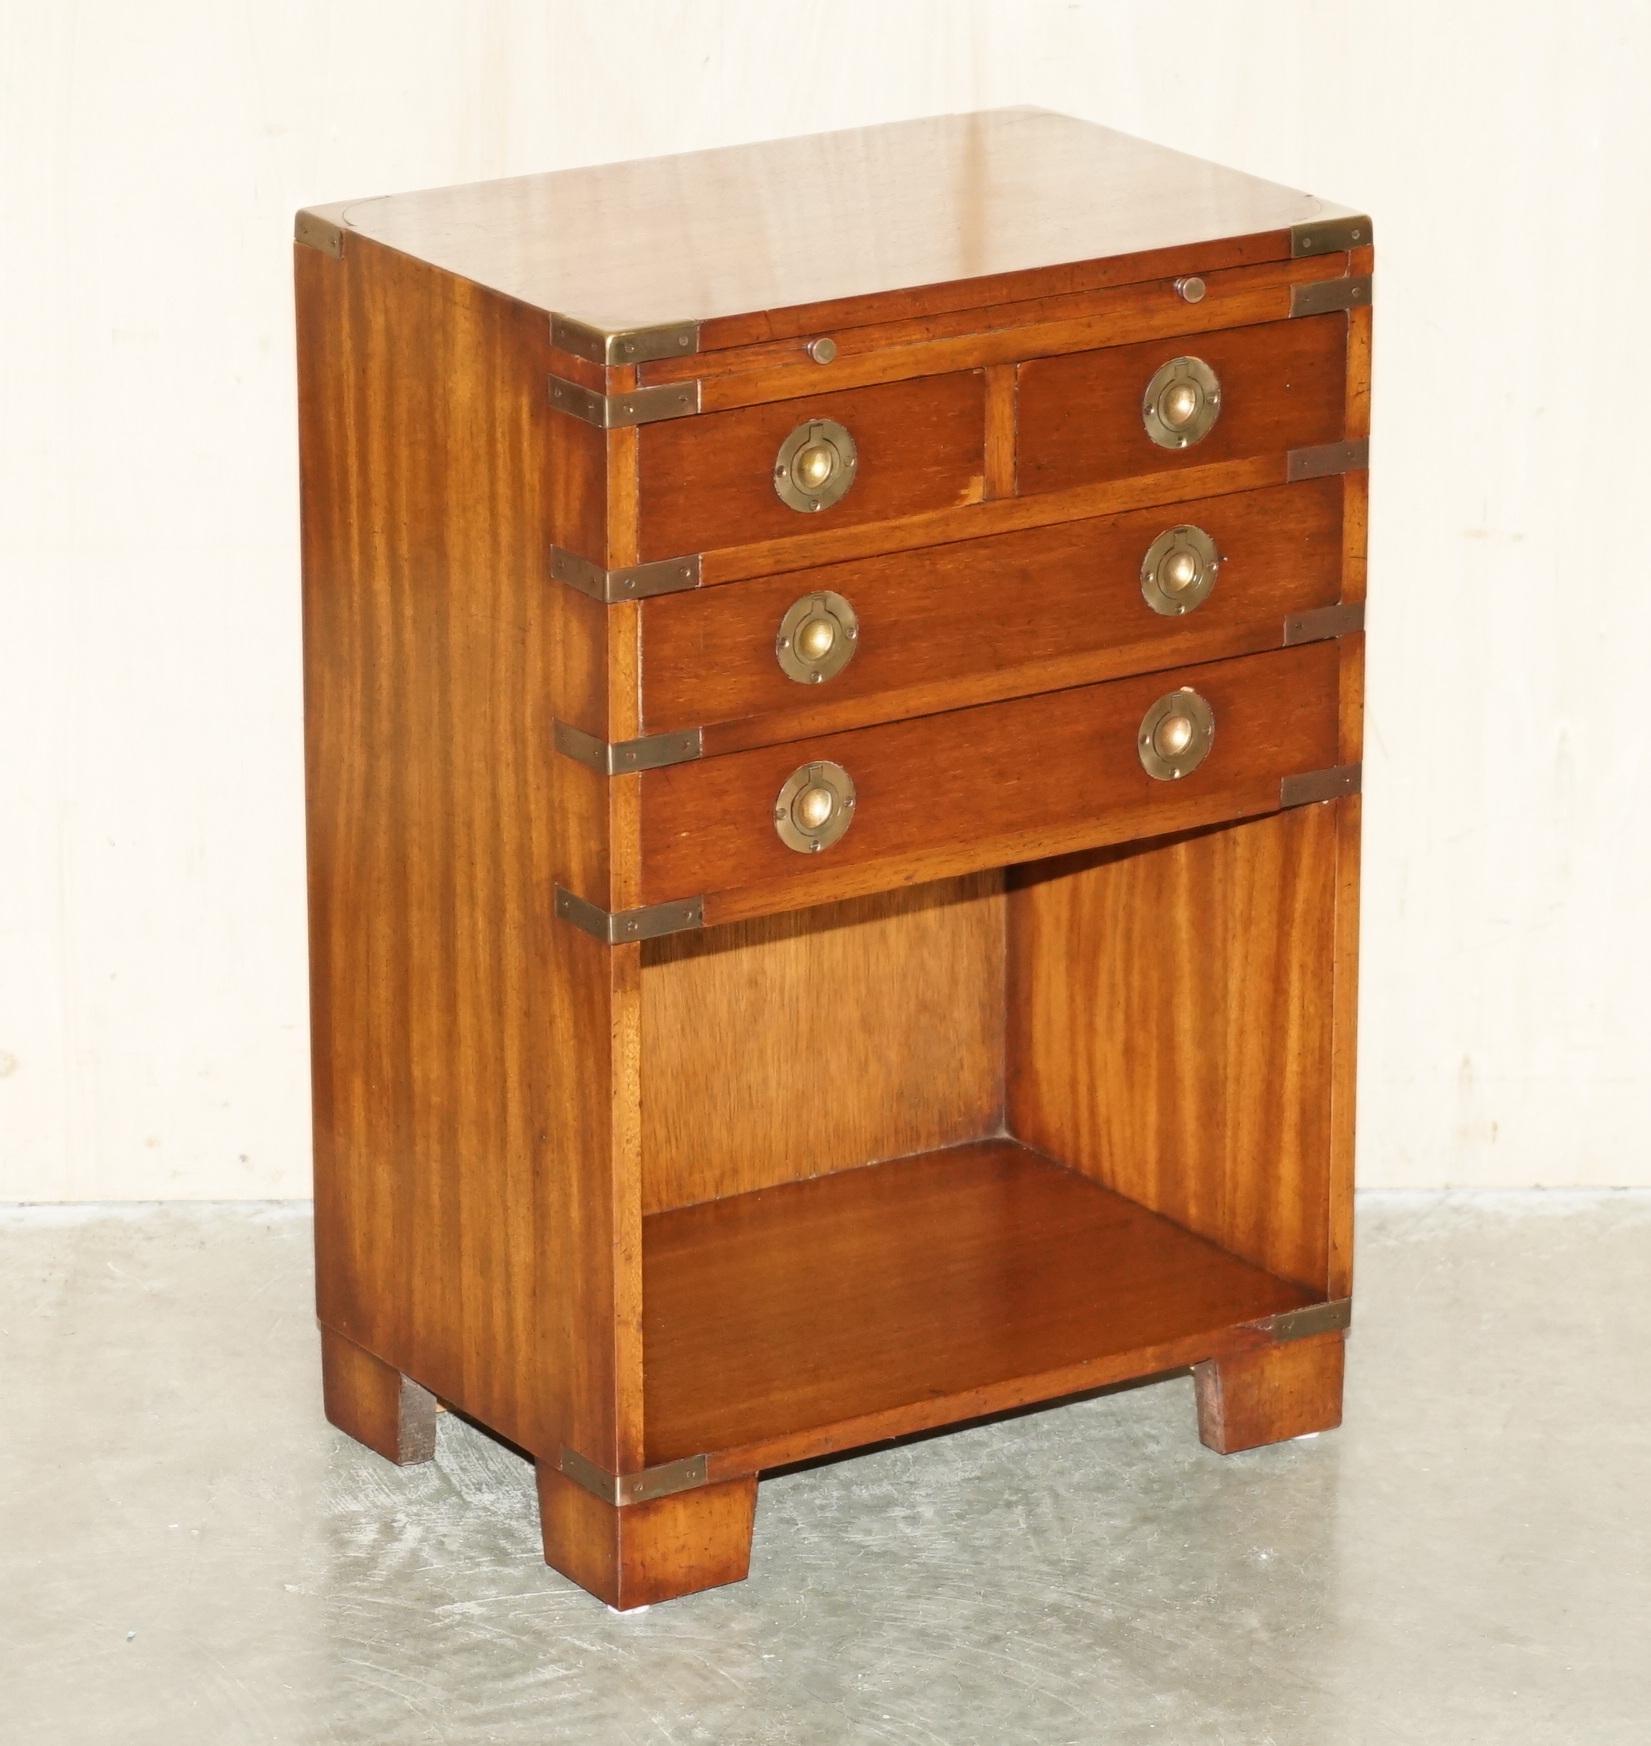 Royal House Antiques

Royal House Antiques is delighted to offer for sale this sublime vintage Bachelors chest with butlers serving tray and Military Campaign drawers.

Please note the delivery fee listed is just a guide, it covers within the M25